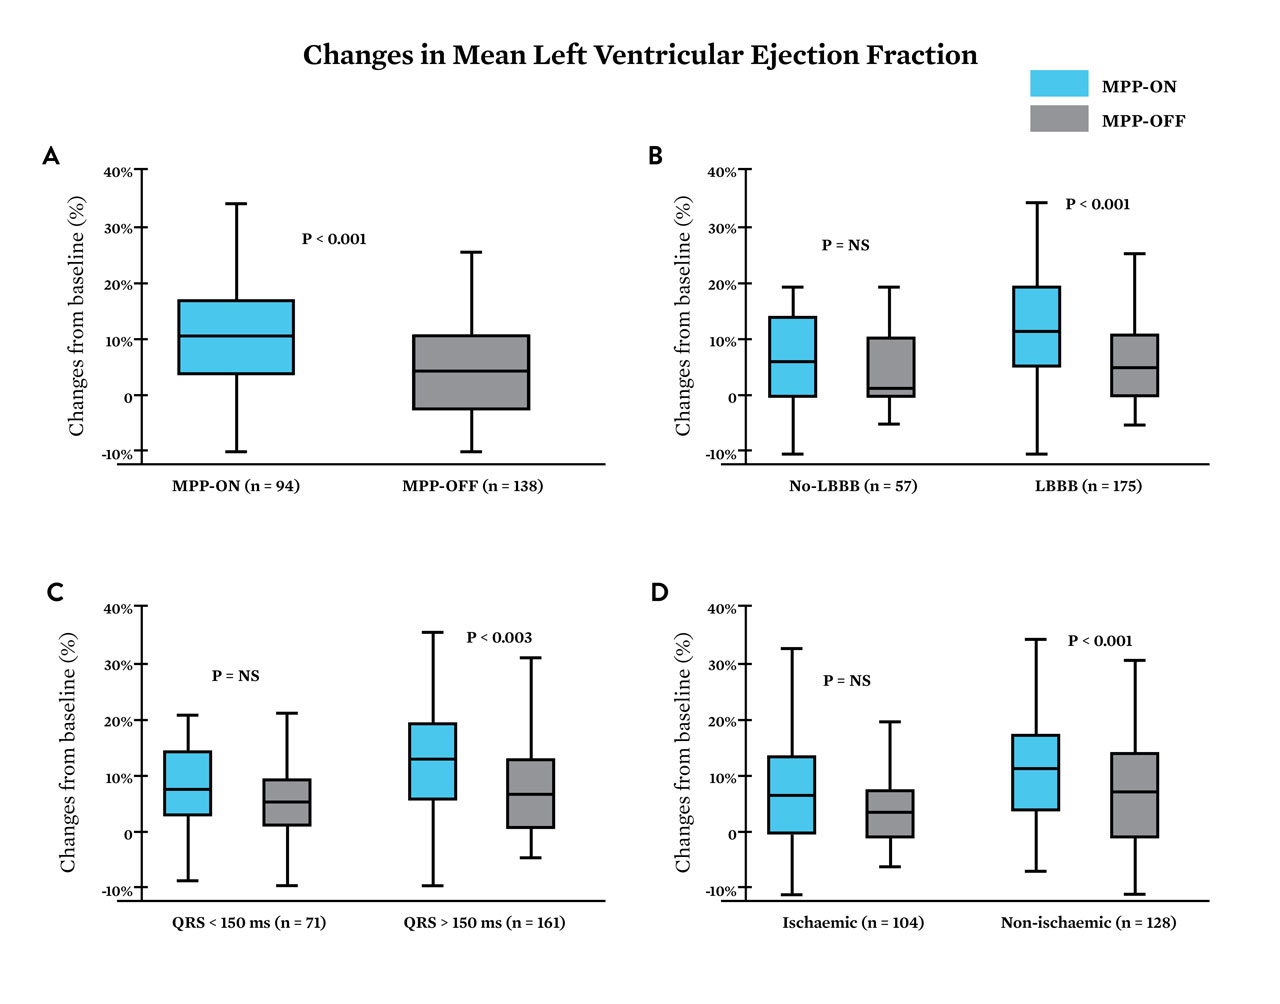 Graph showing changes in mean left ventricular ejection fraction